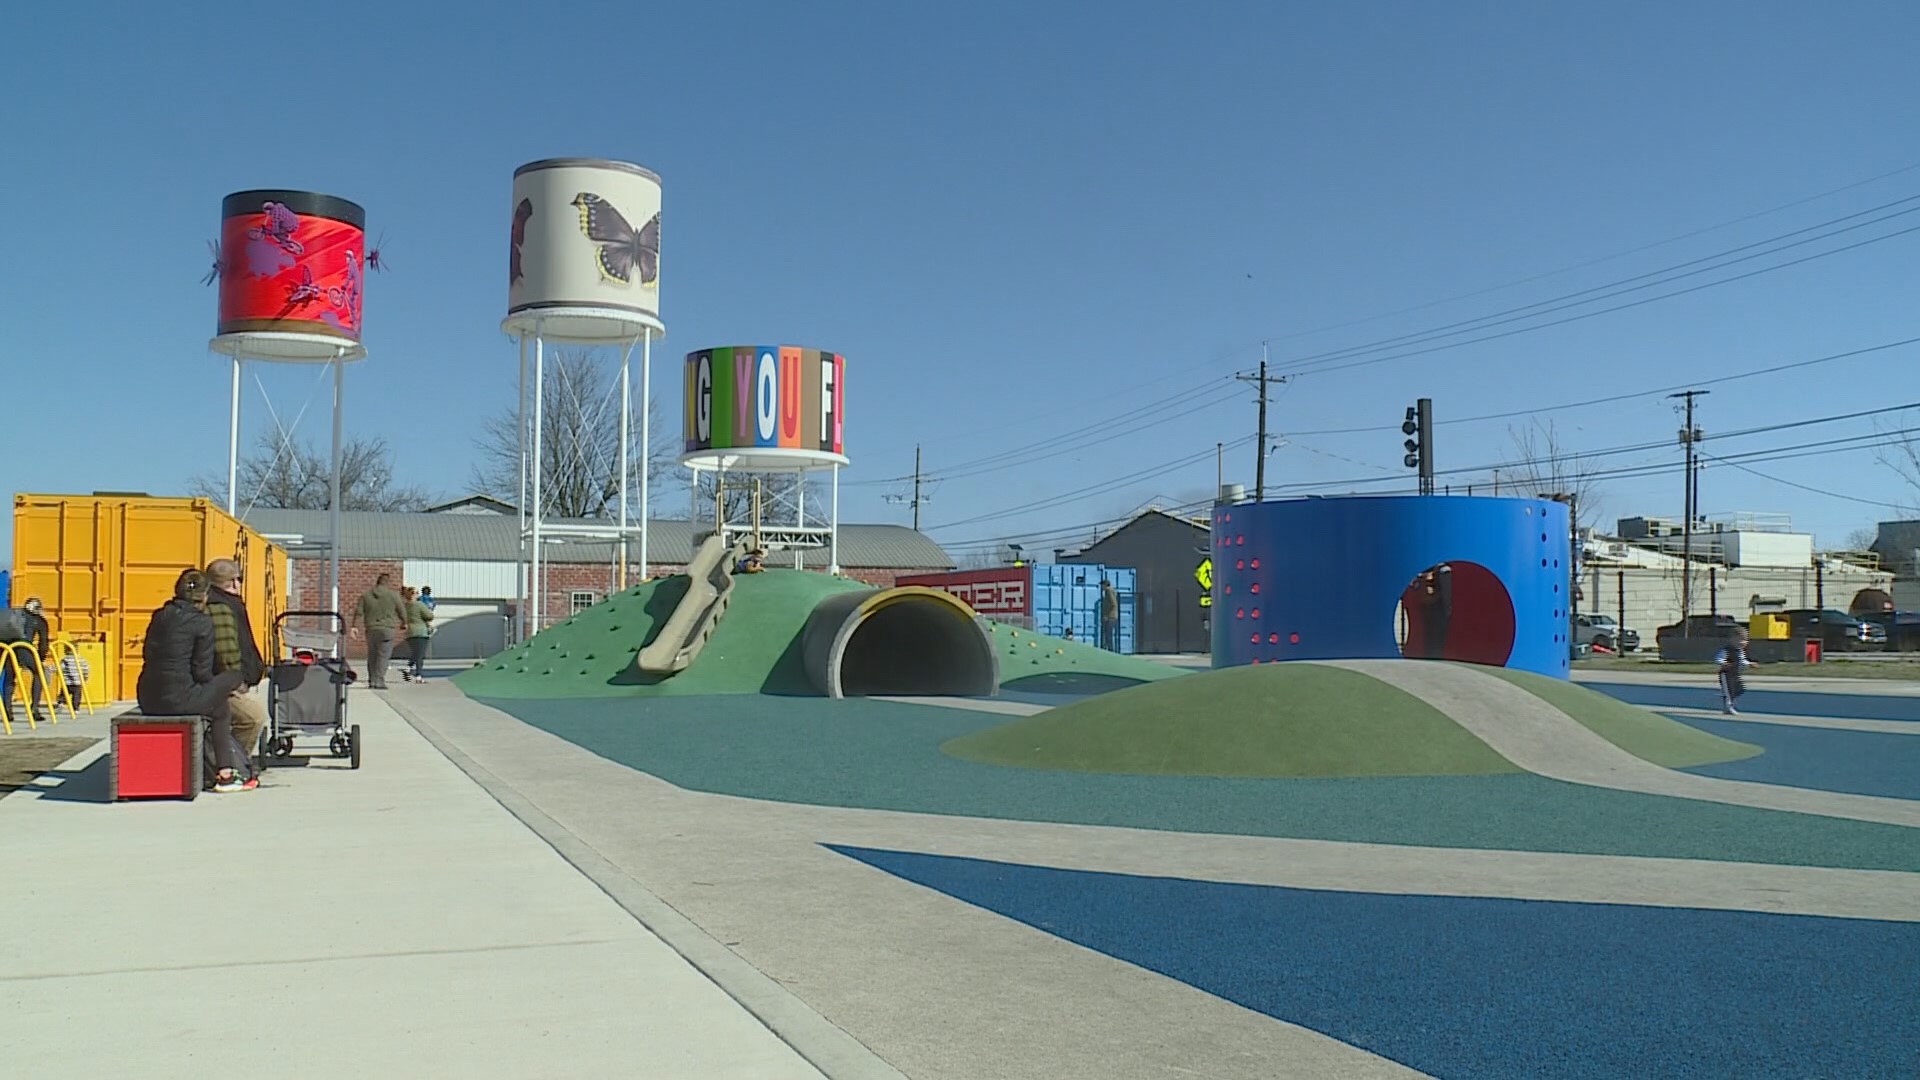 Spend a day filled with fun at the Railyard Park in Rogers!